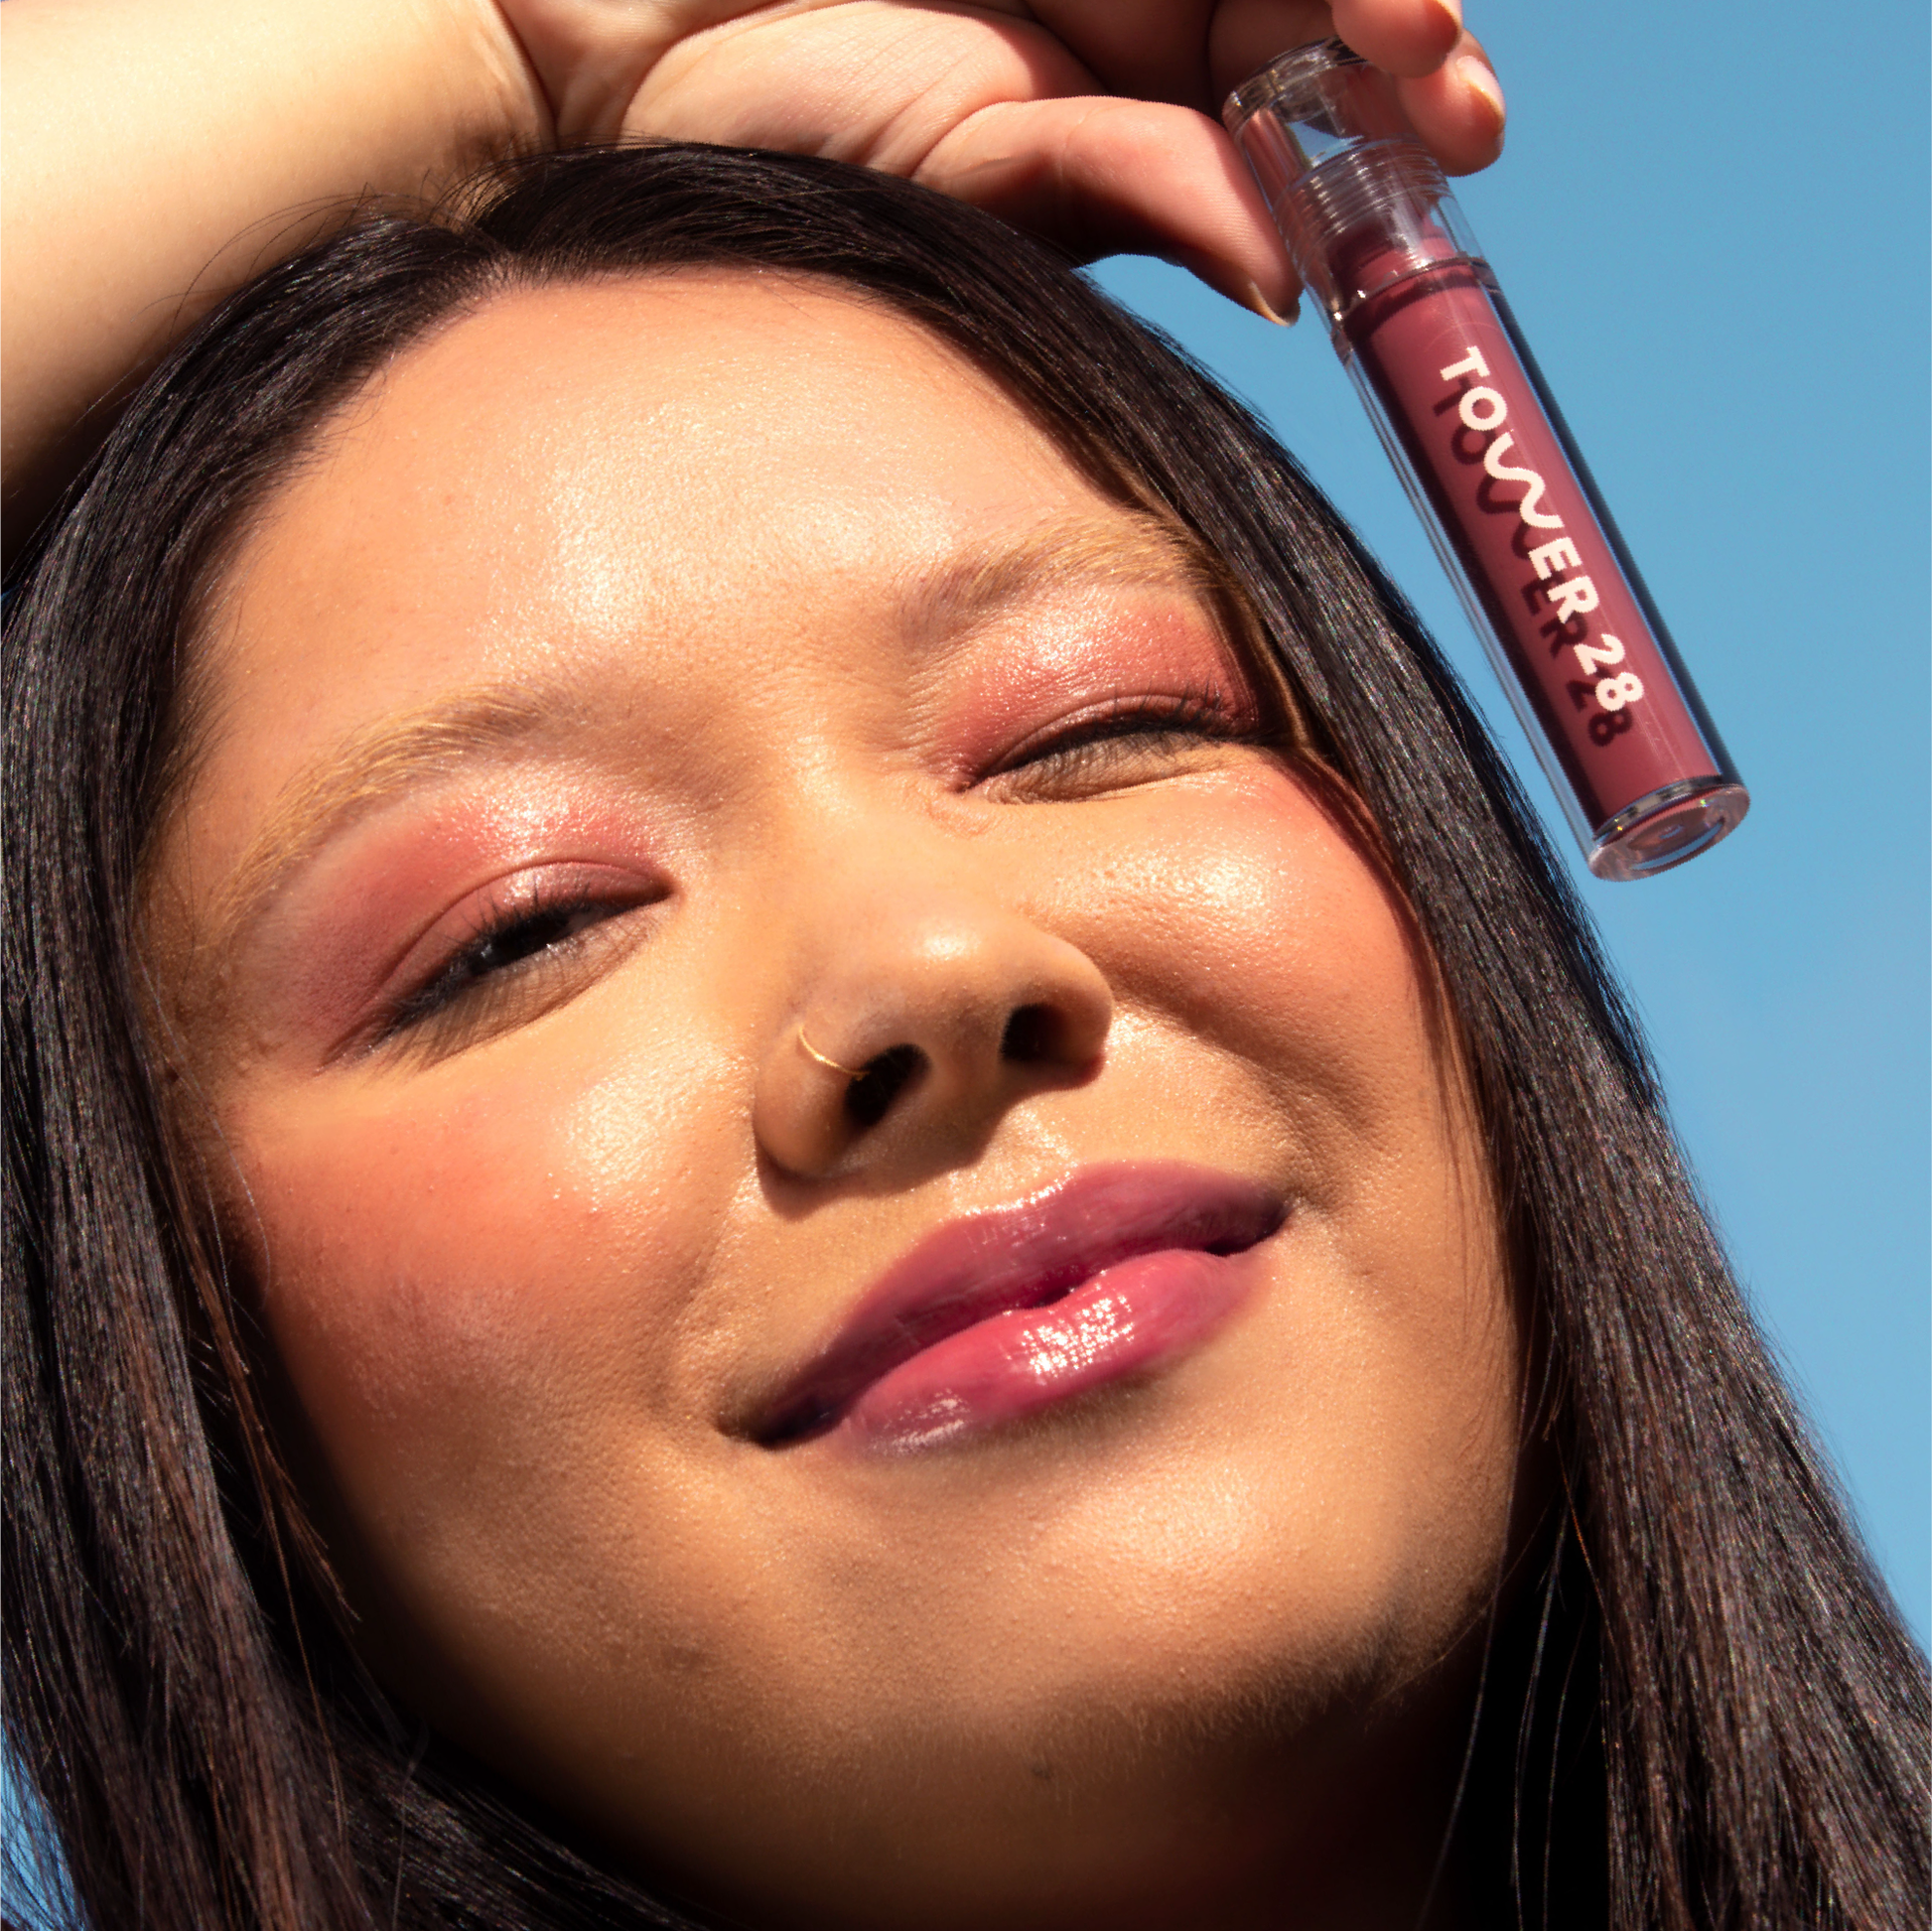 Closeup photo of a girl with very glossy lips, wearing the Tower 28 Beauty ShineOn Milky Lip Jelly shade in Sesame